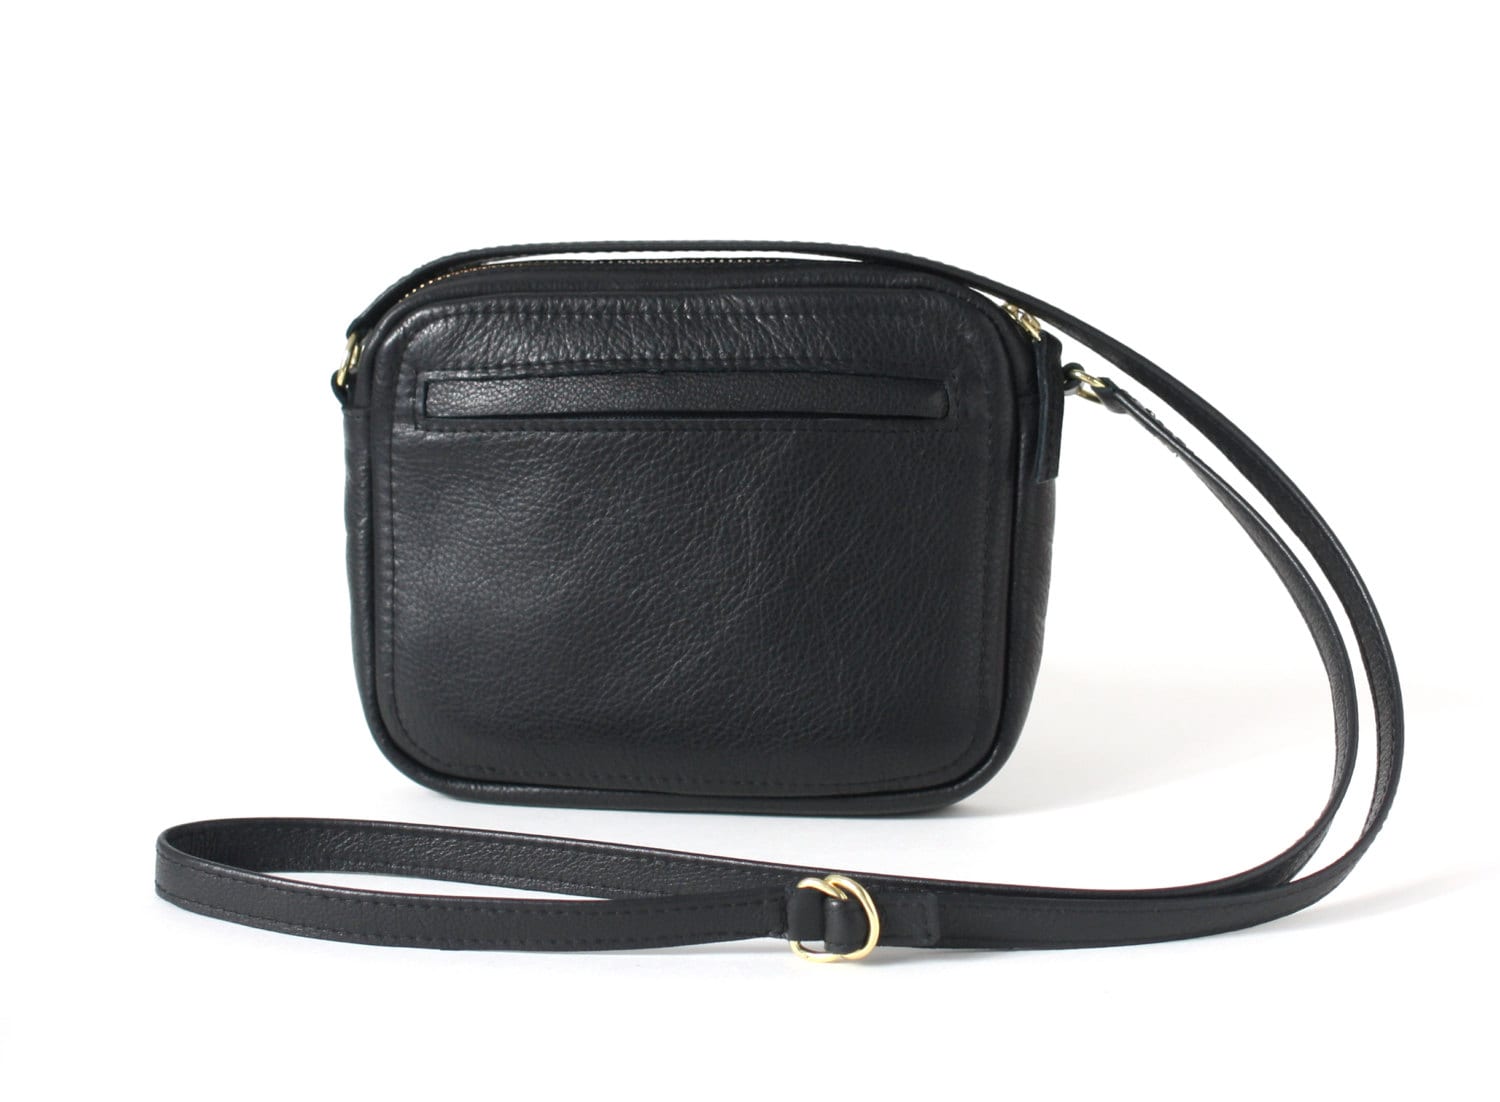 Crossbody Zip Bag Black Leather Small Leather Purse Shoulder